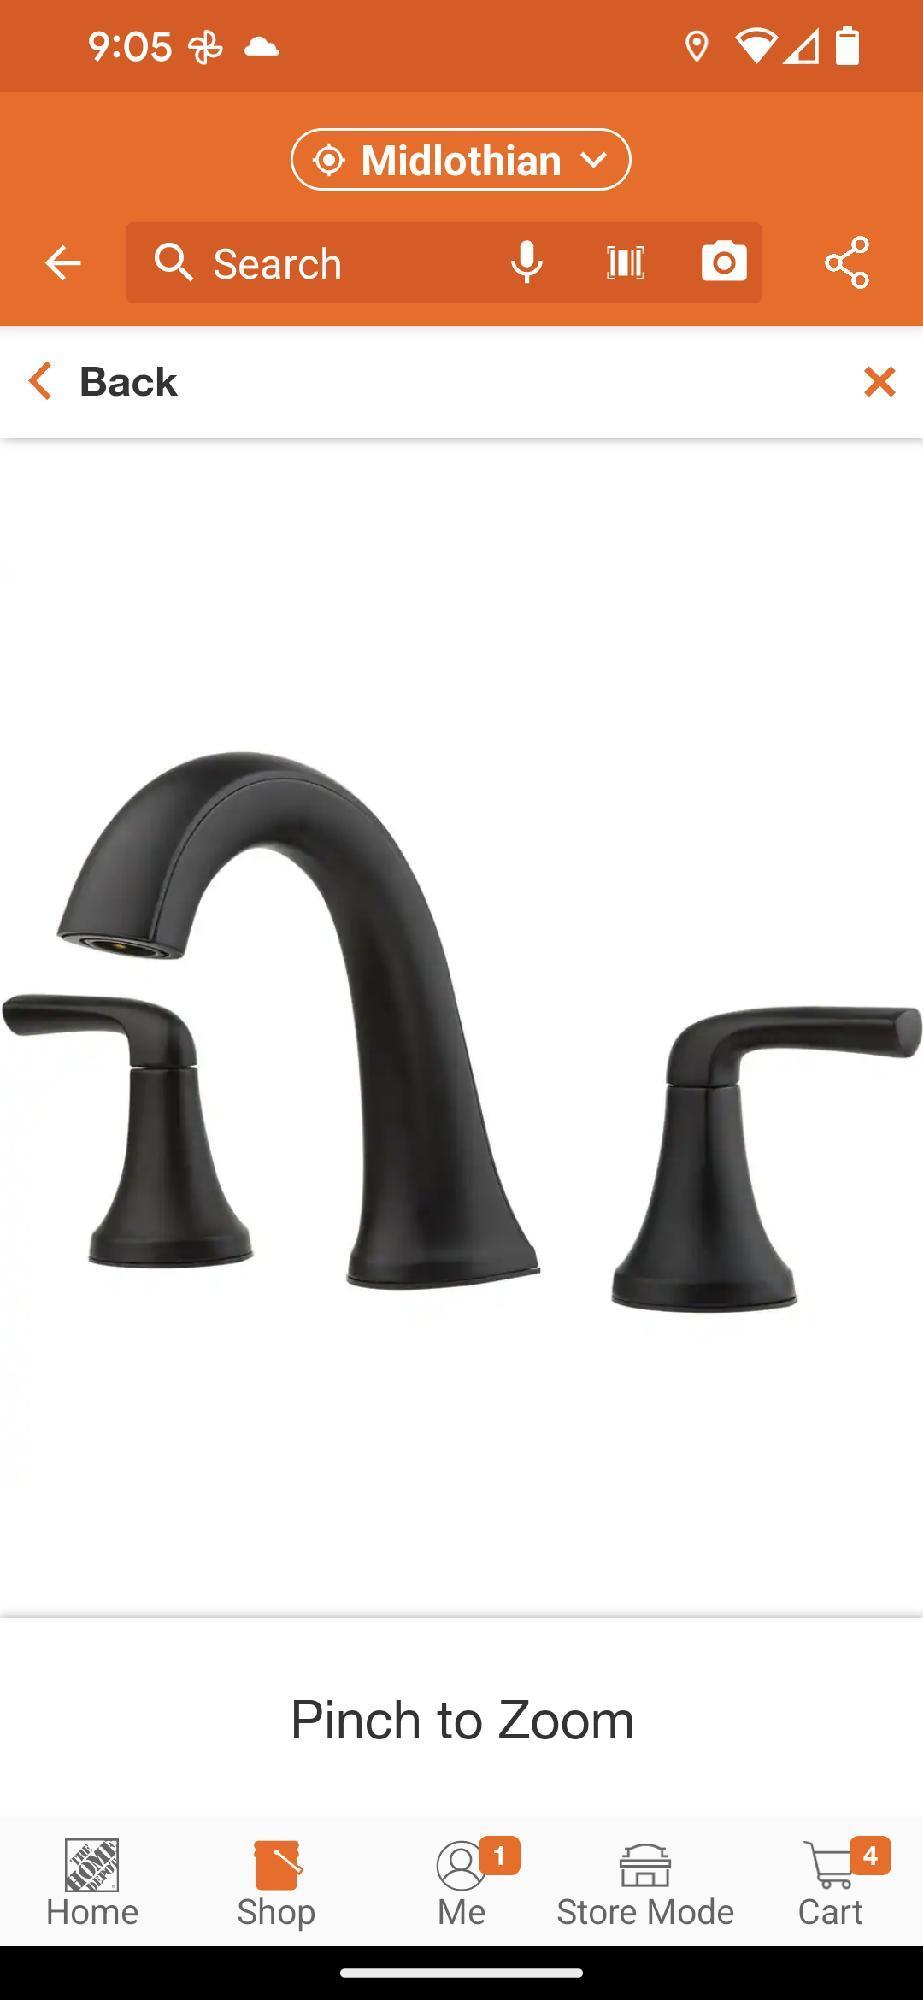 Pfister Ladera 8 in. Widespread Double Handle Bathroom Faucet in Matte Black, Appears to be New in